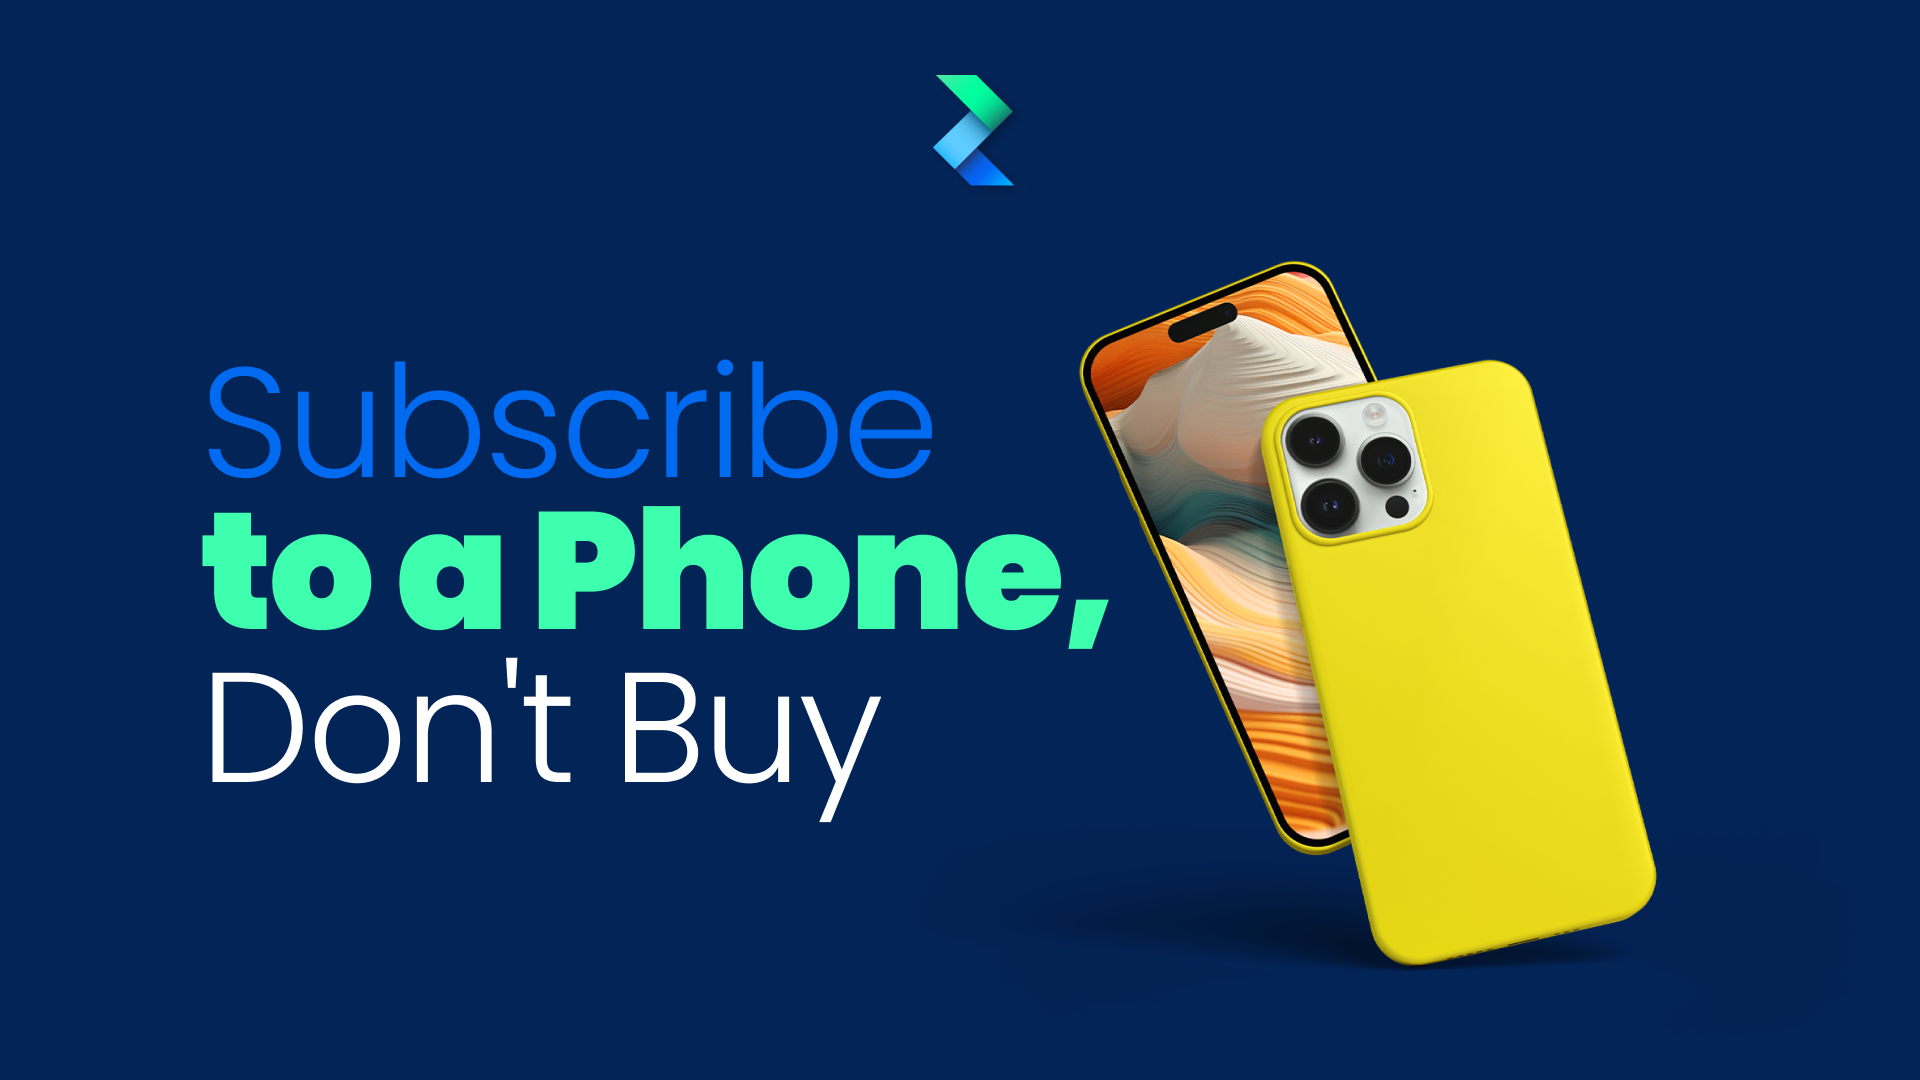 Subscribe to a Phone, Don't Buy